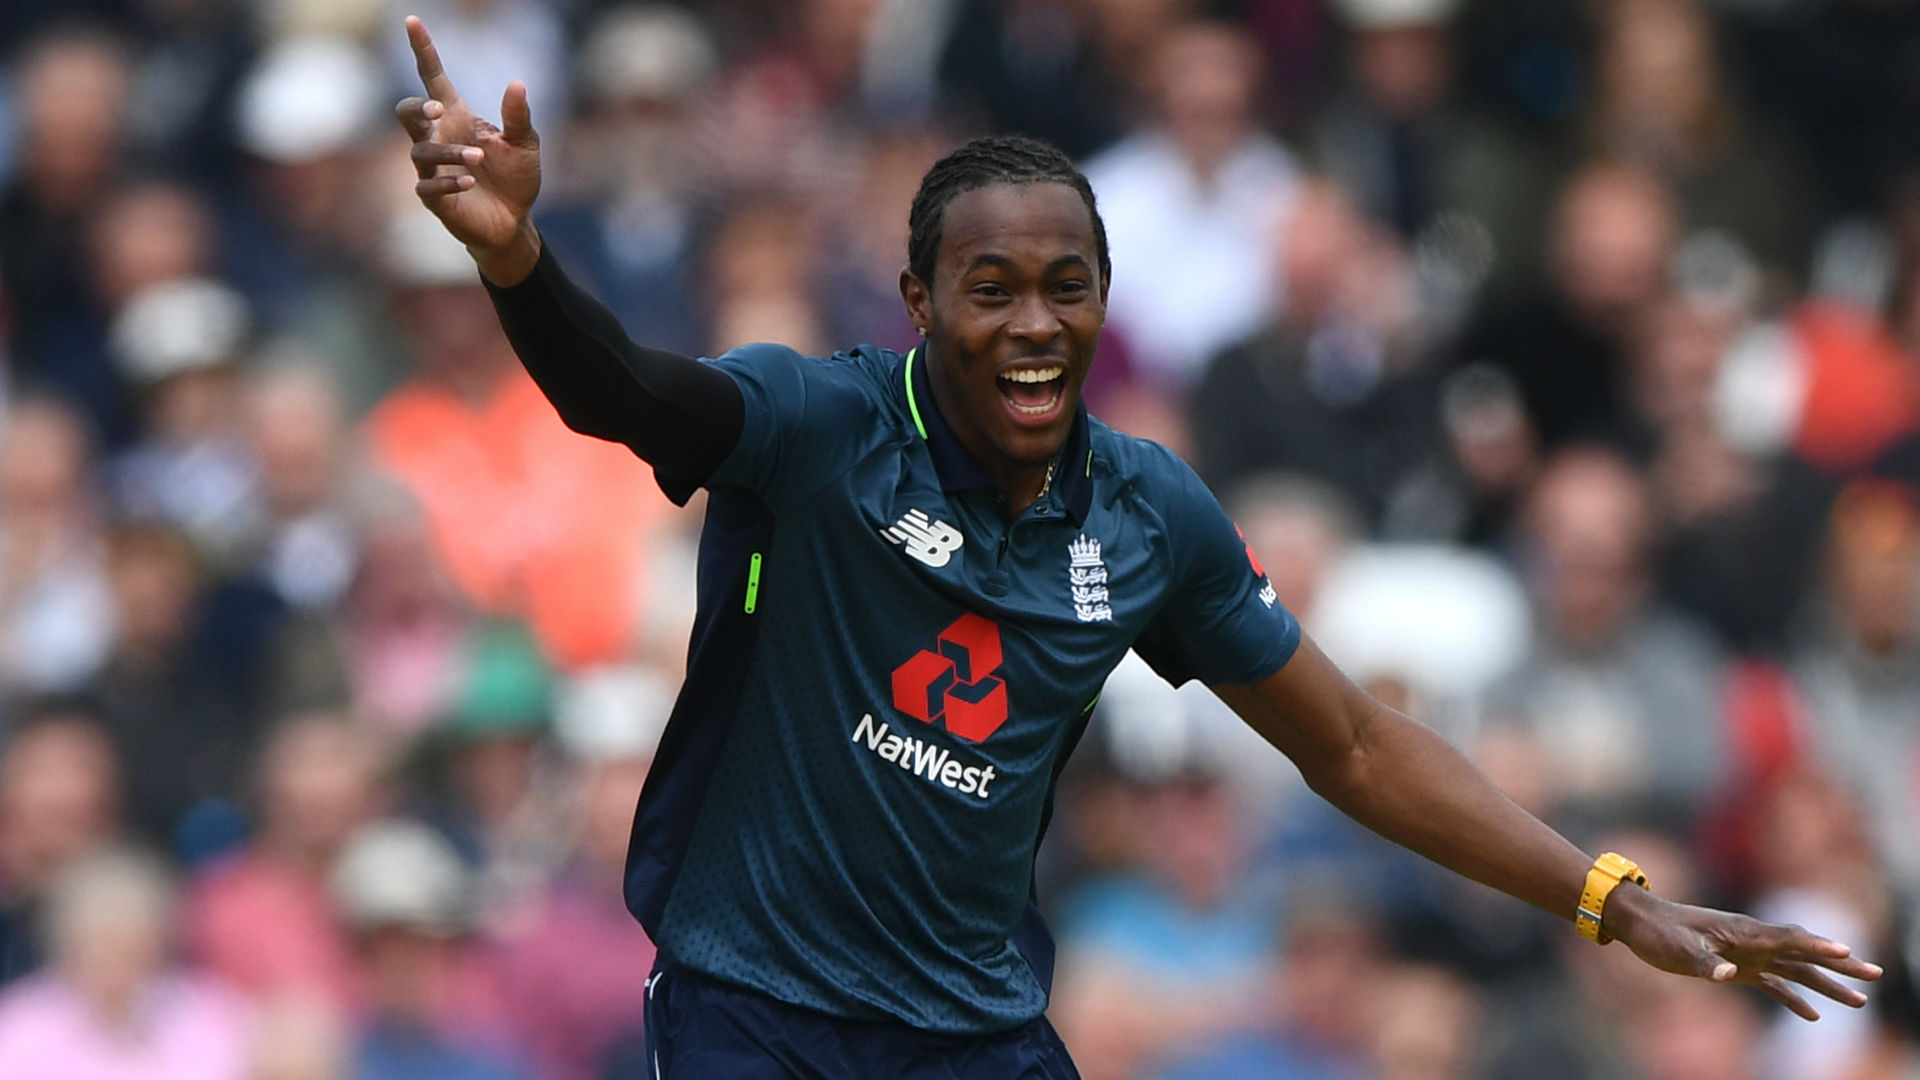 Liam Dawson is a surprise inclusion in England's squad for the World Cup, while Jofra Archer takes a fast-bowling berth.